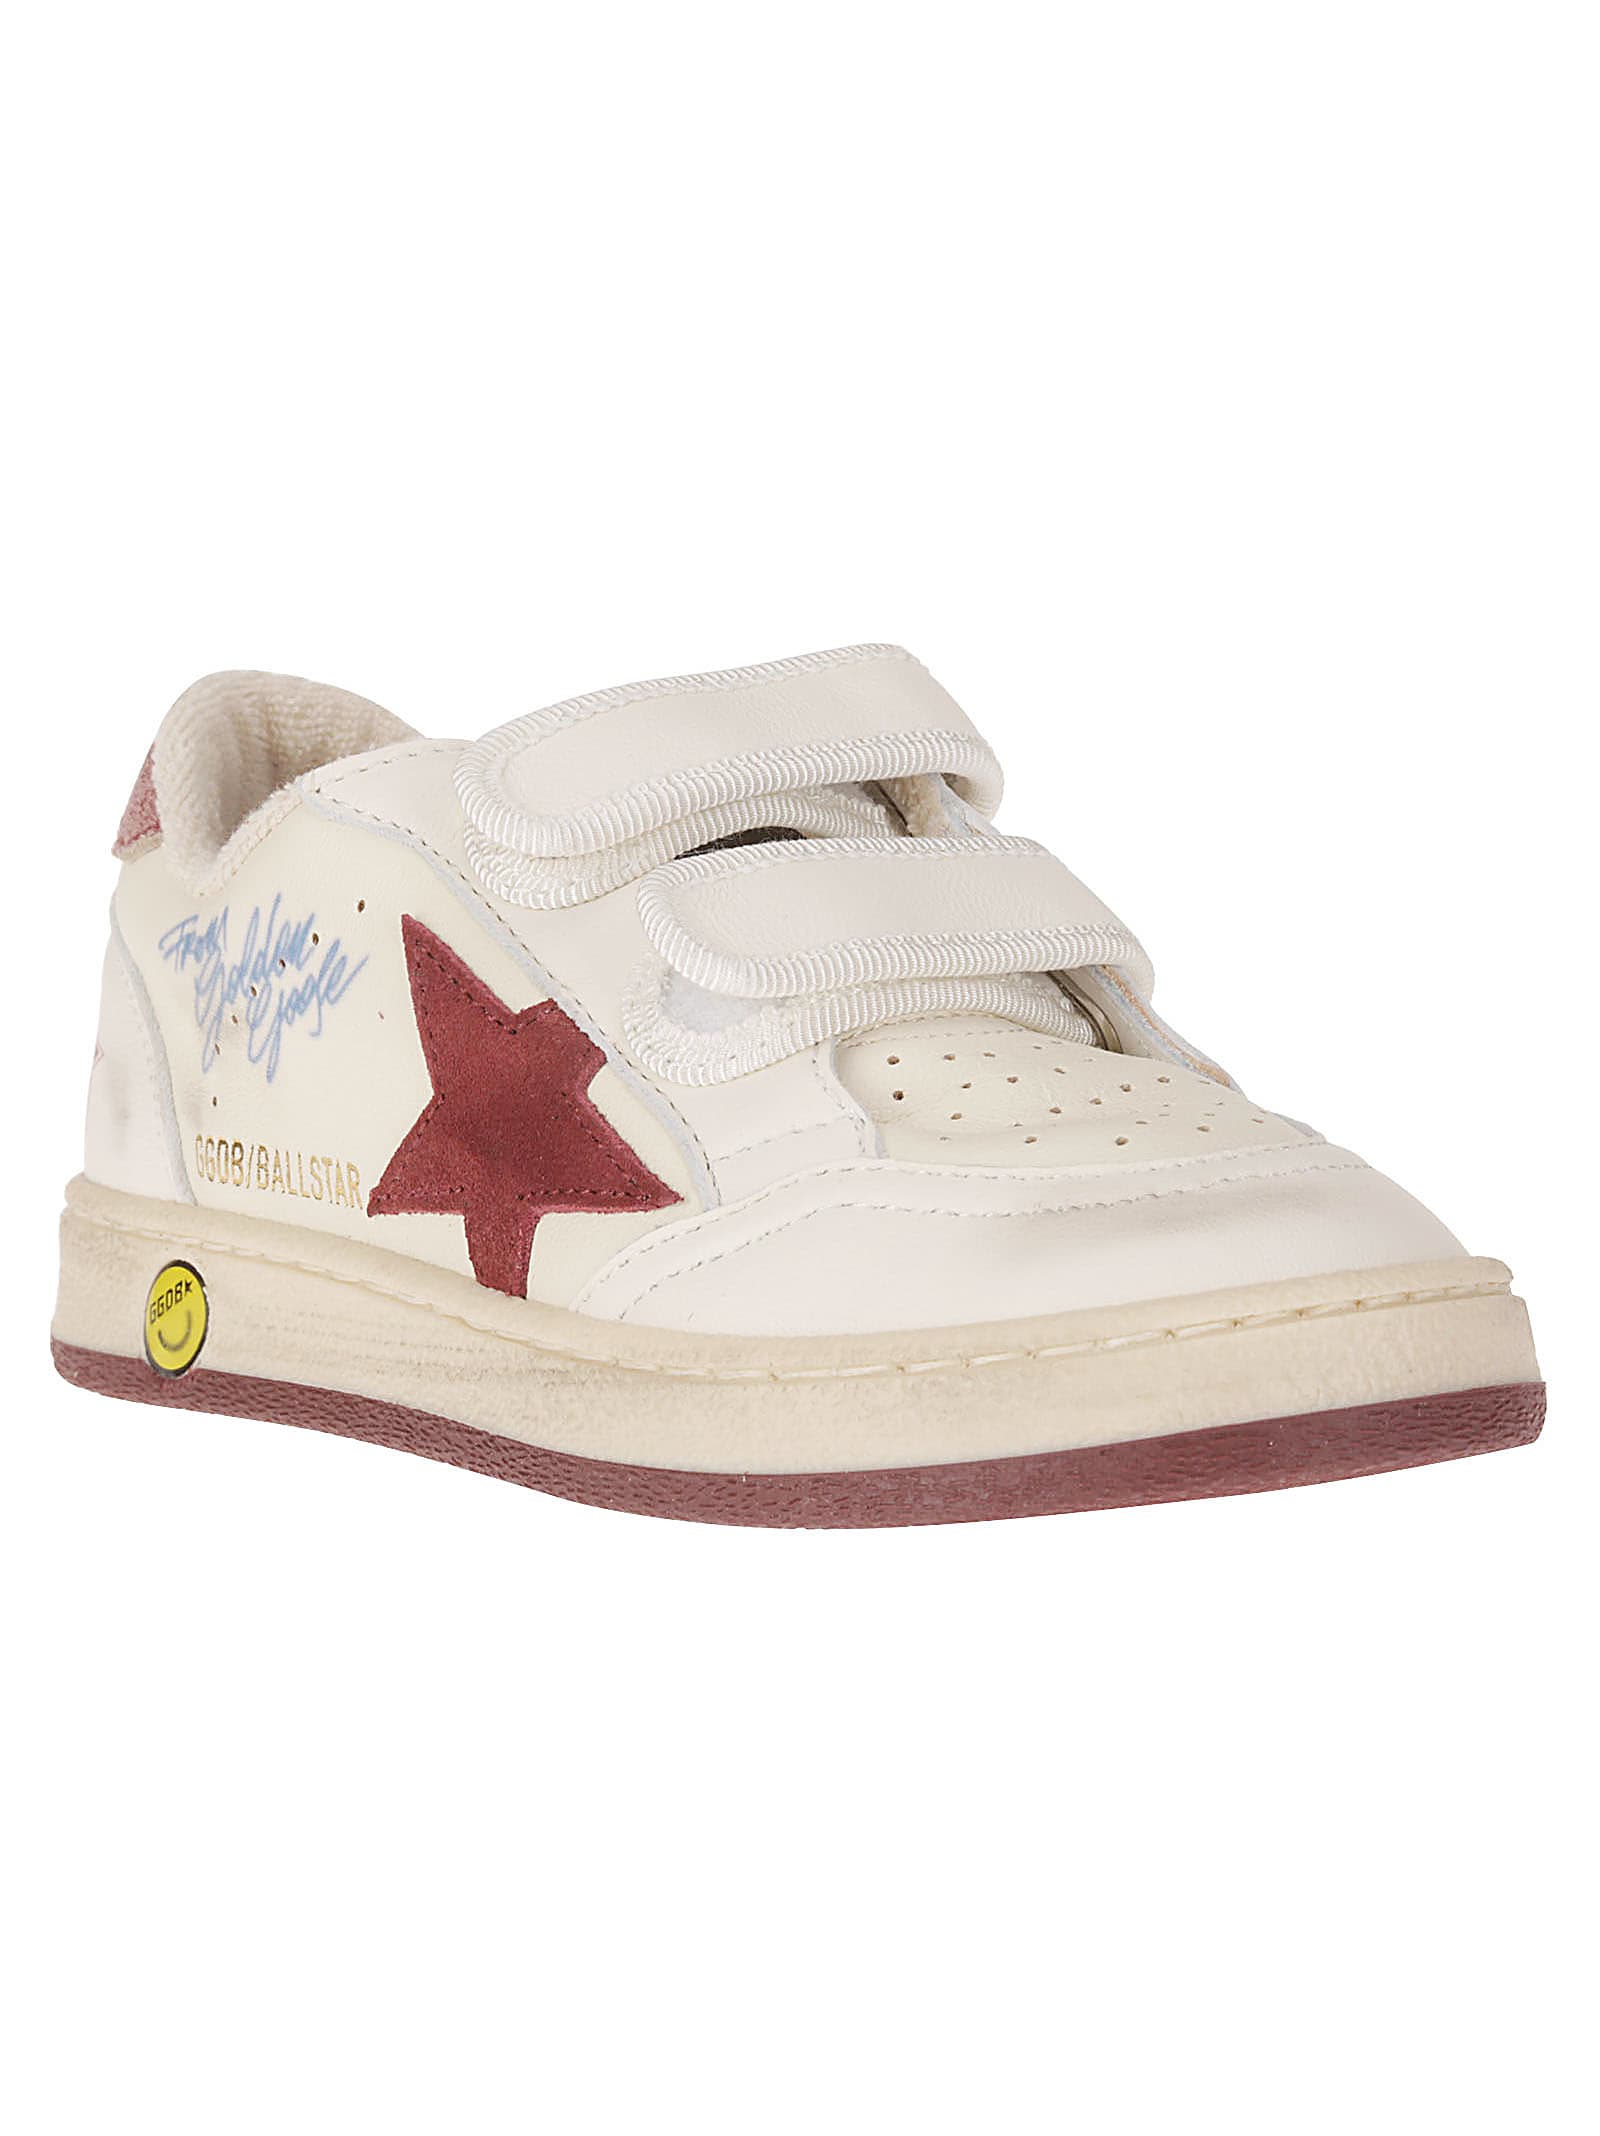 Shop Golden Goose Ballstar Strap Nappa Upper Toe And Spur Suede S In Beige/pomegranade/white/red